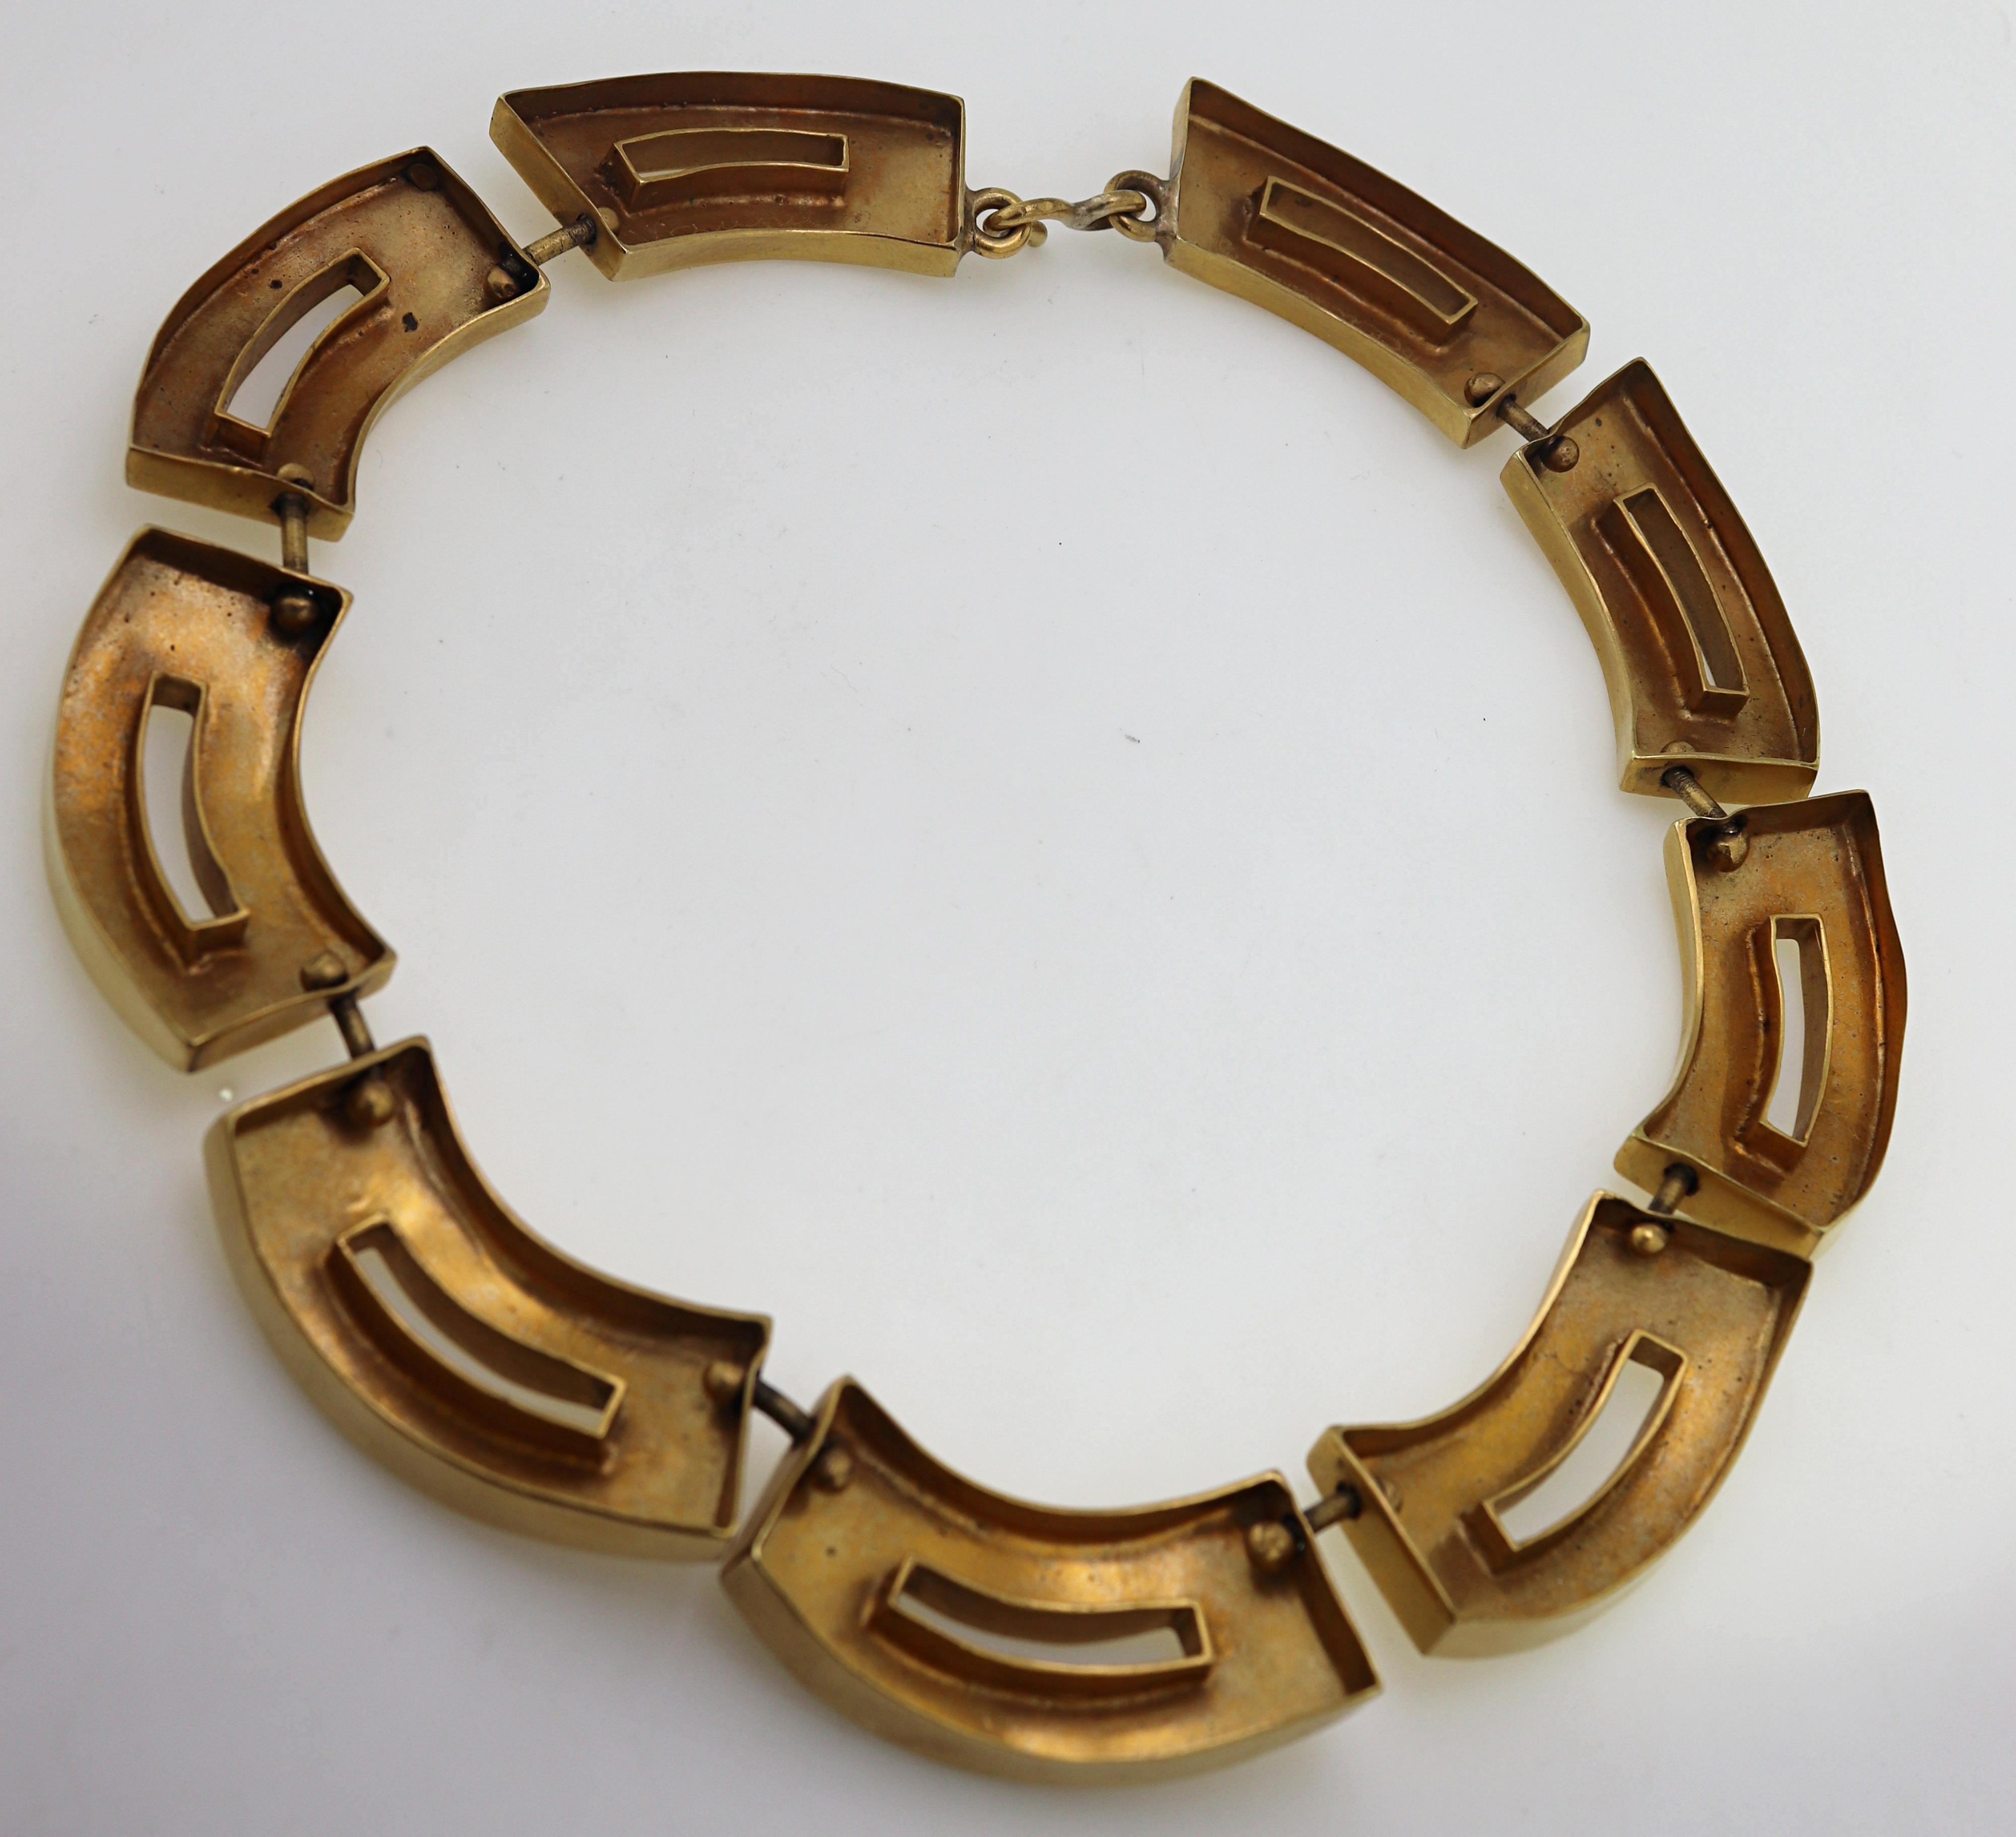 Composed of nine bold modern geometric links, 46.5 X 19.2 X 5.5 mm,
completed by a hook clasp, forming a 16 inch necklace, signed Vaubel.